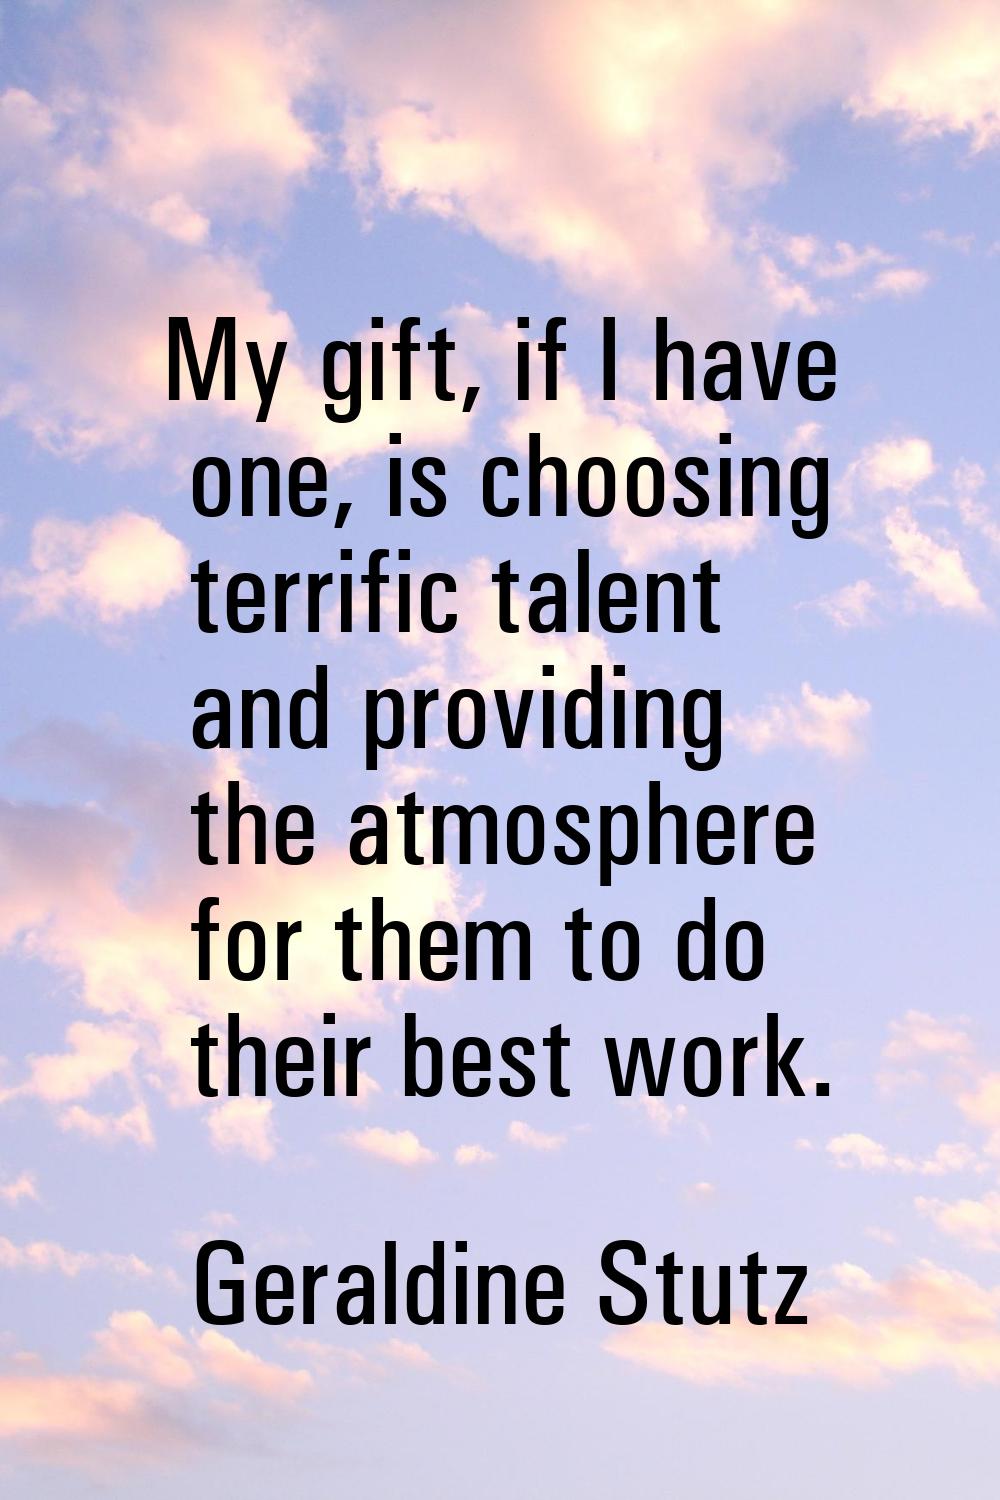 My gift, if I have one, is choosing terrific talent and providing the atmosphere for them to do the